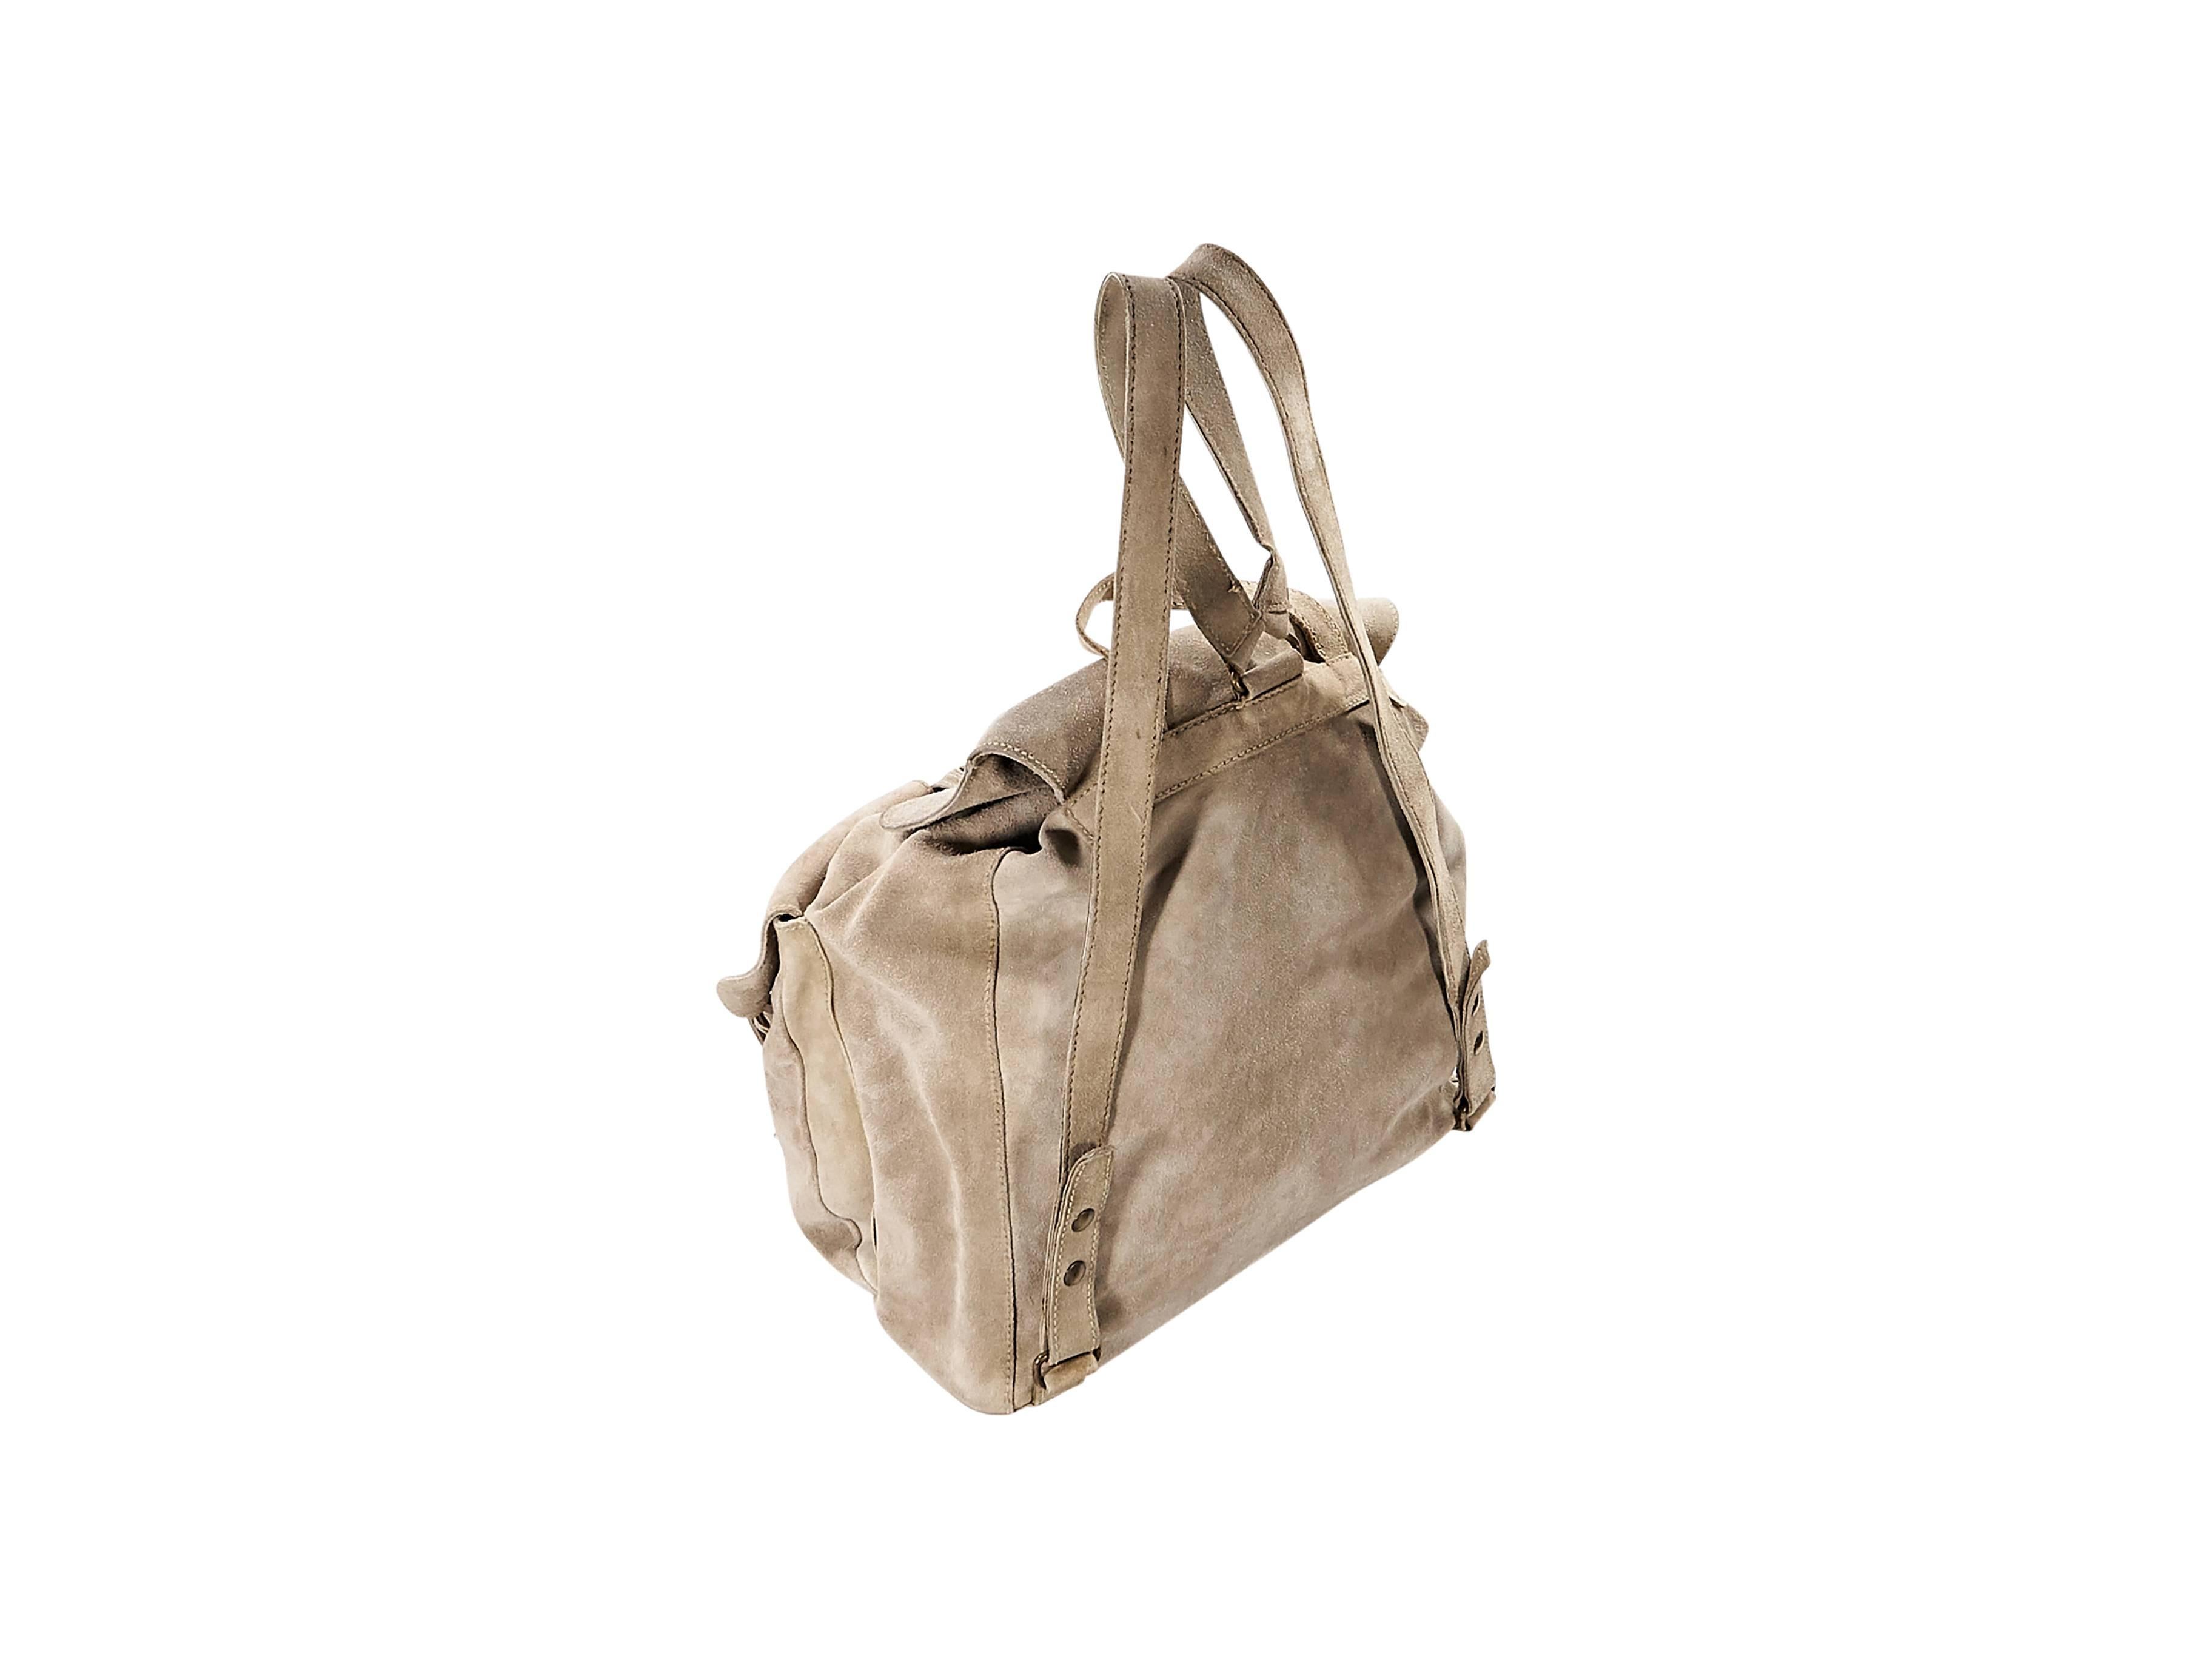 Product details:  Tan suede backpack by Prada.  Top carry handle.  Shoulder straps.  Drawstring closure under front flap with buckle closure.  Front exterior buckle flap pockets.  Lined interior with inner zip pocket.  Antiqued goldtone hardware. 